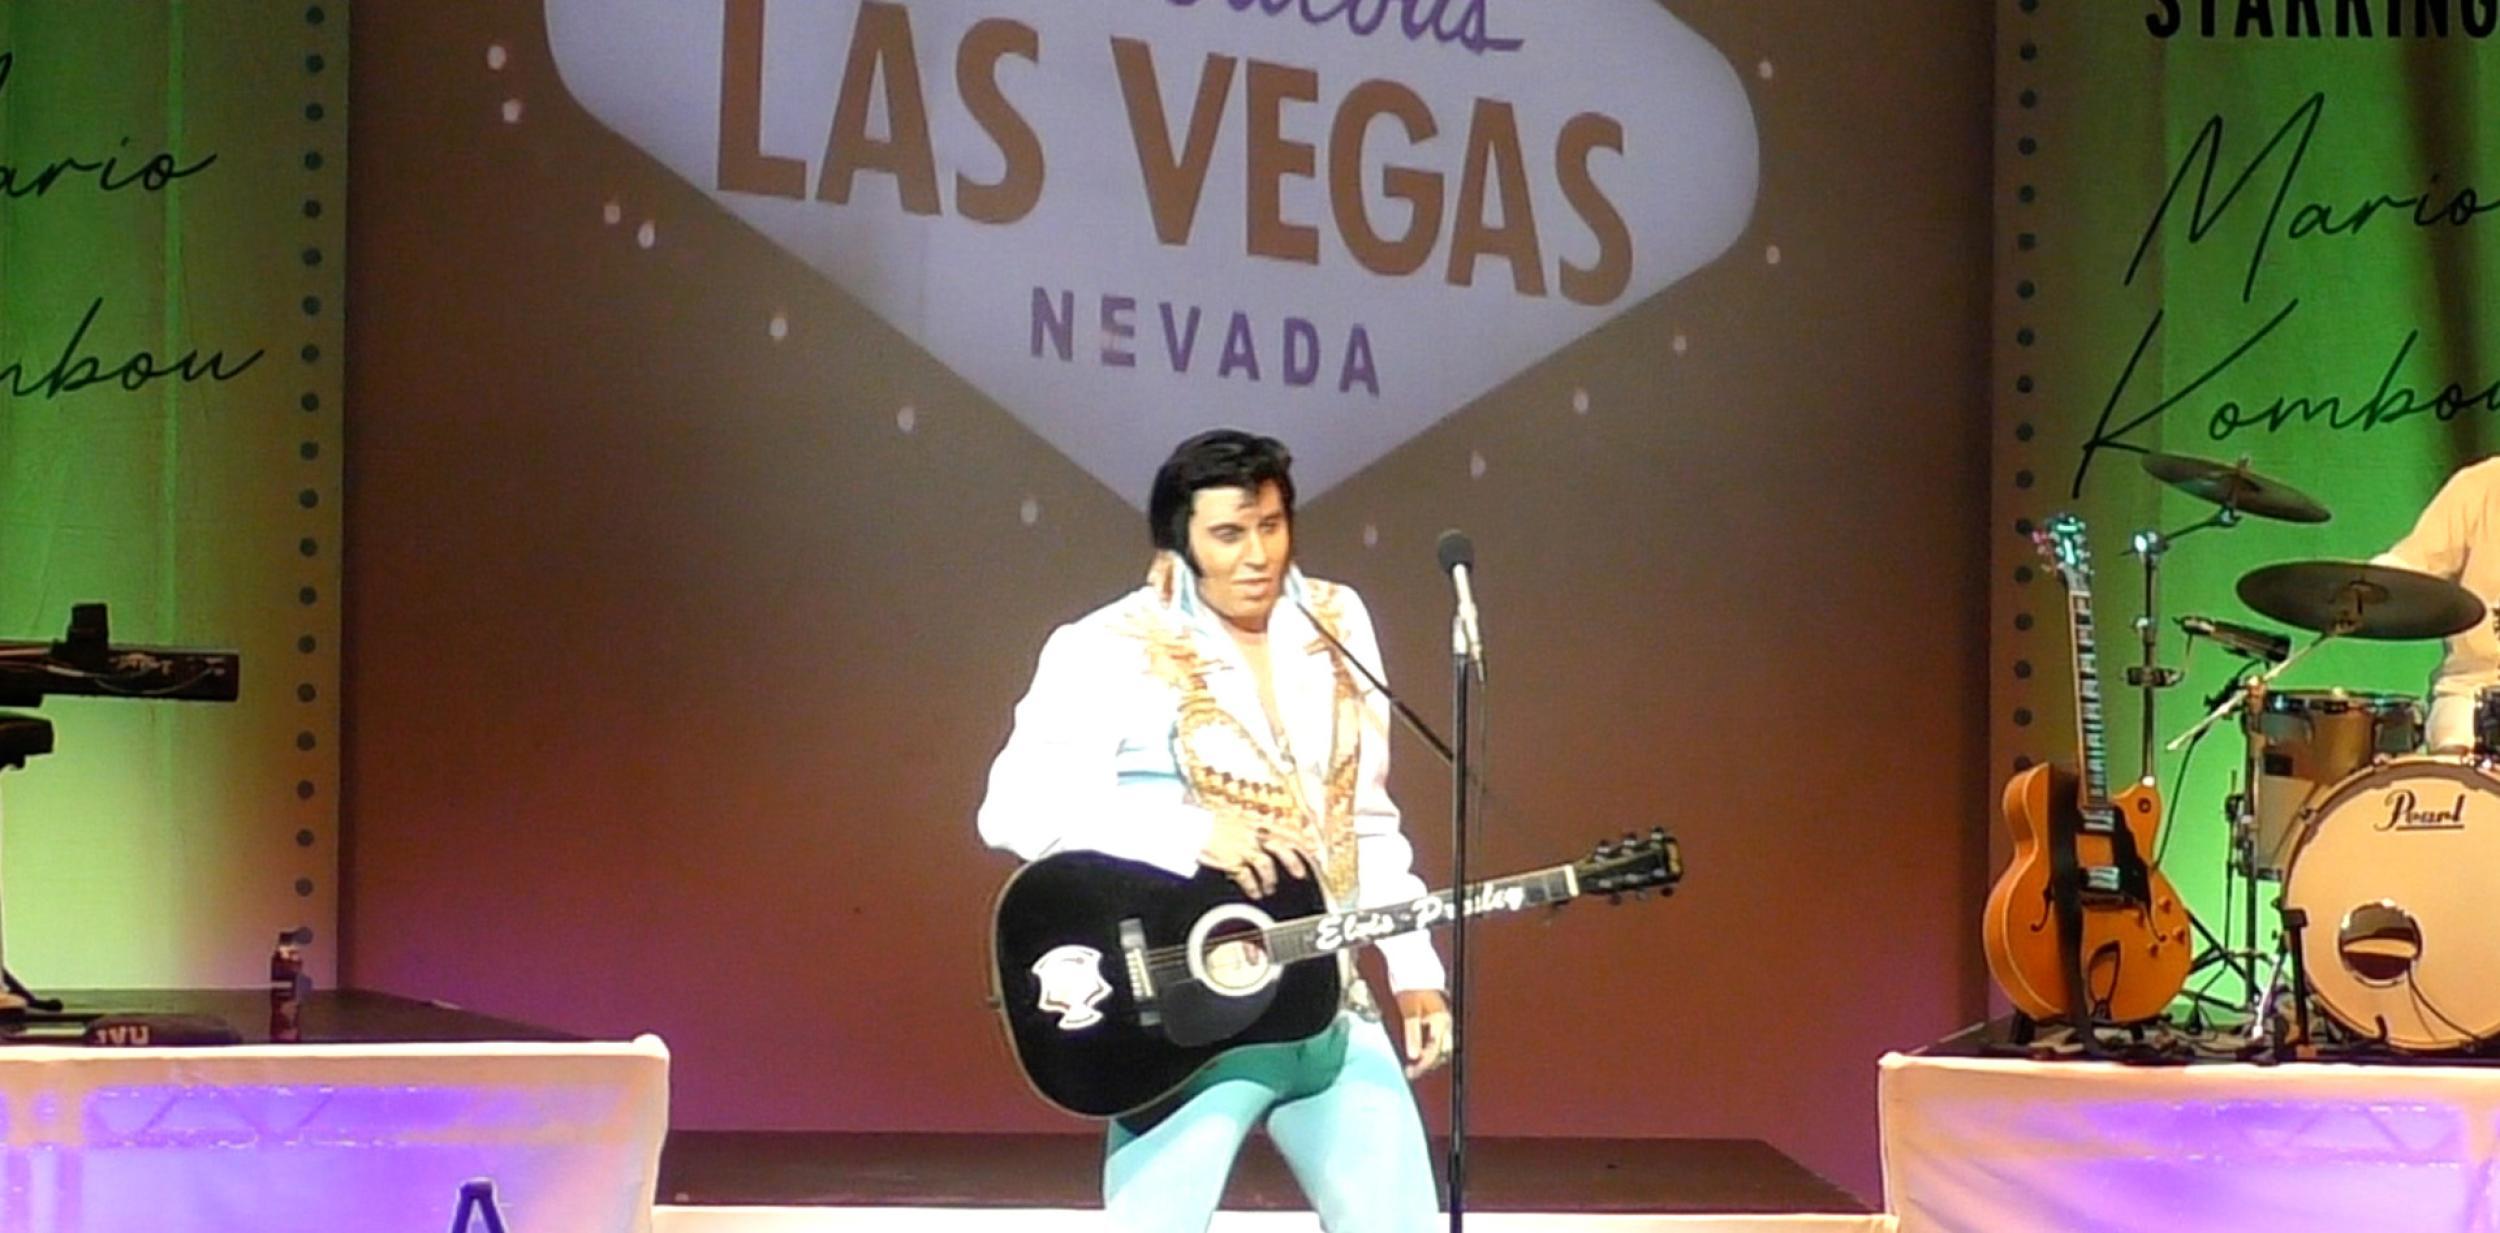 Elvis impersonator on stage with guitar in front of Las Vegas sign